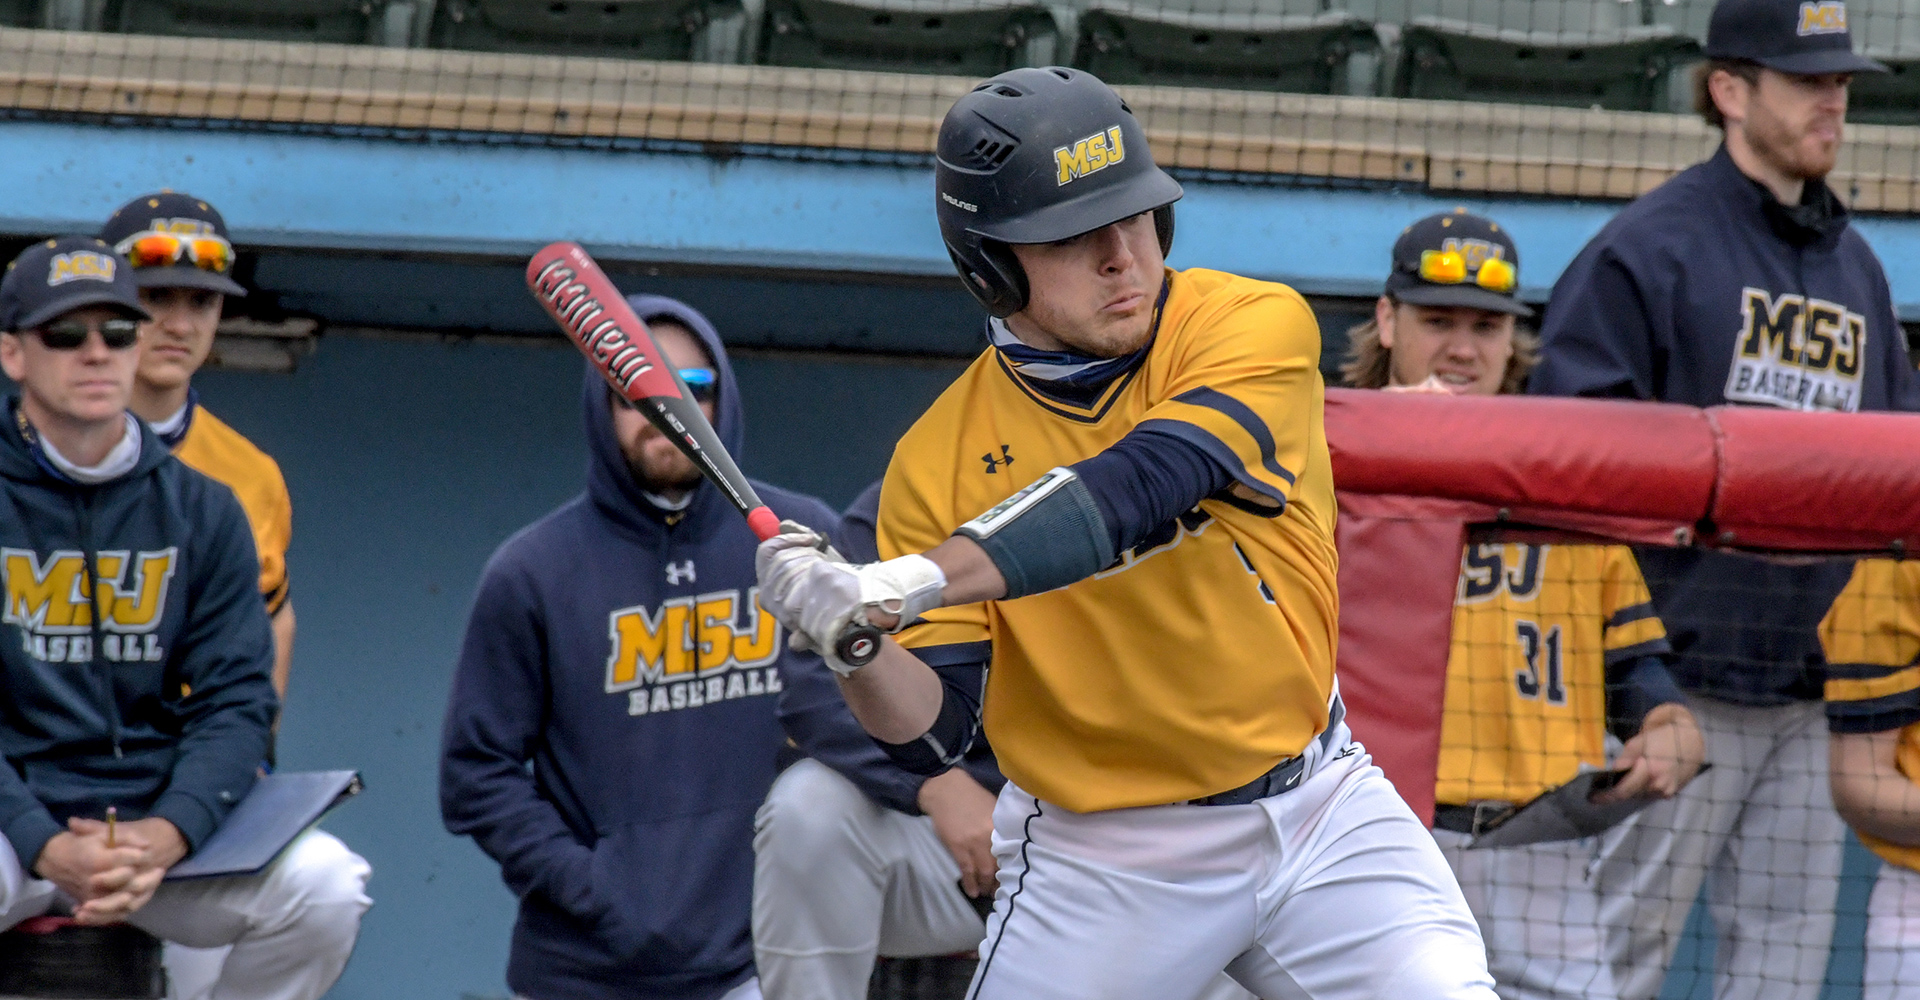 MSJ baseball player up to bat at game on field.